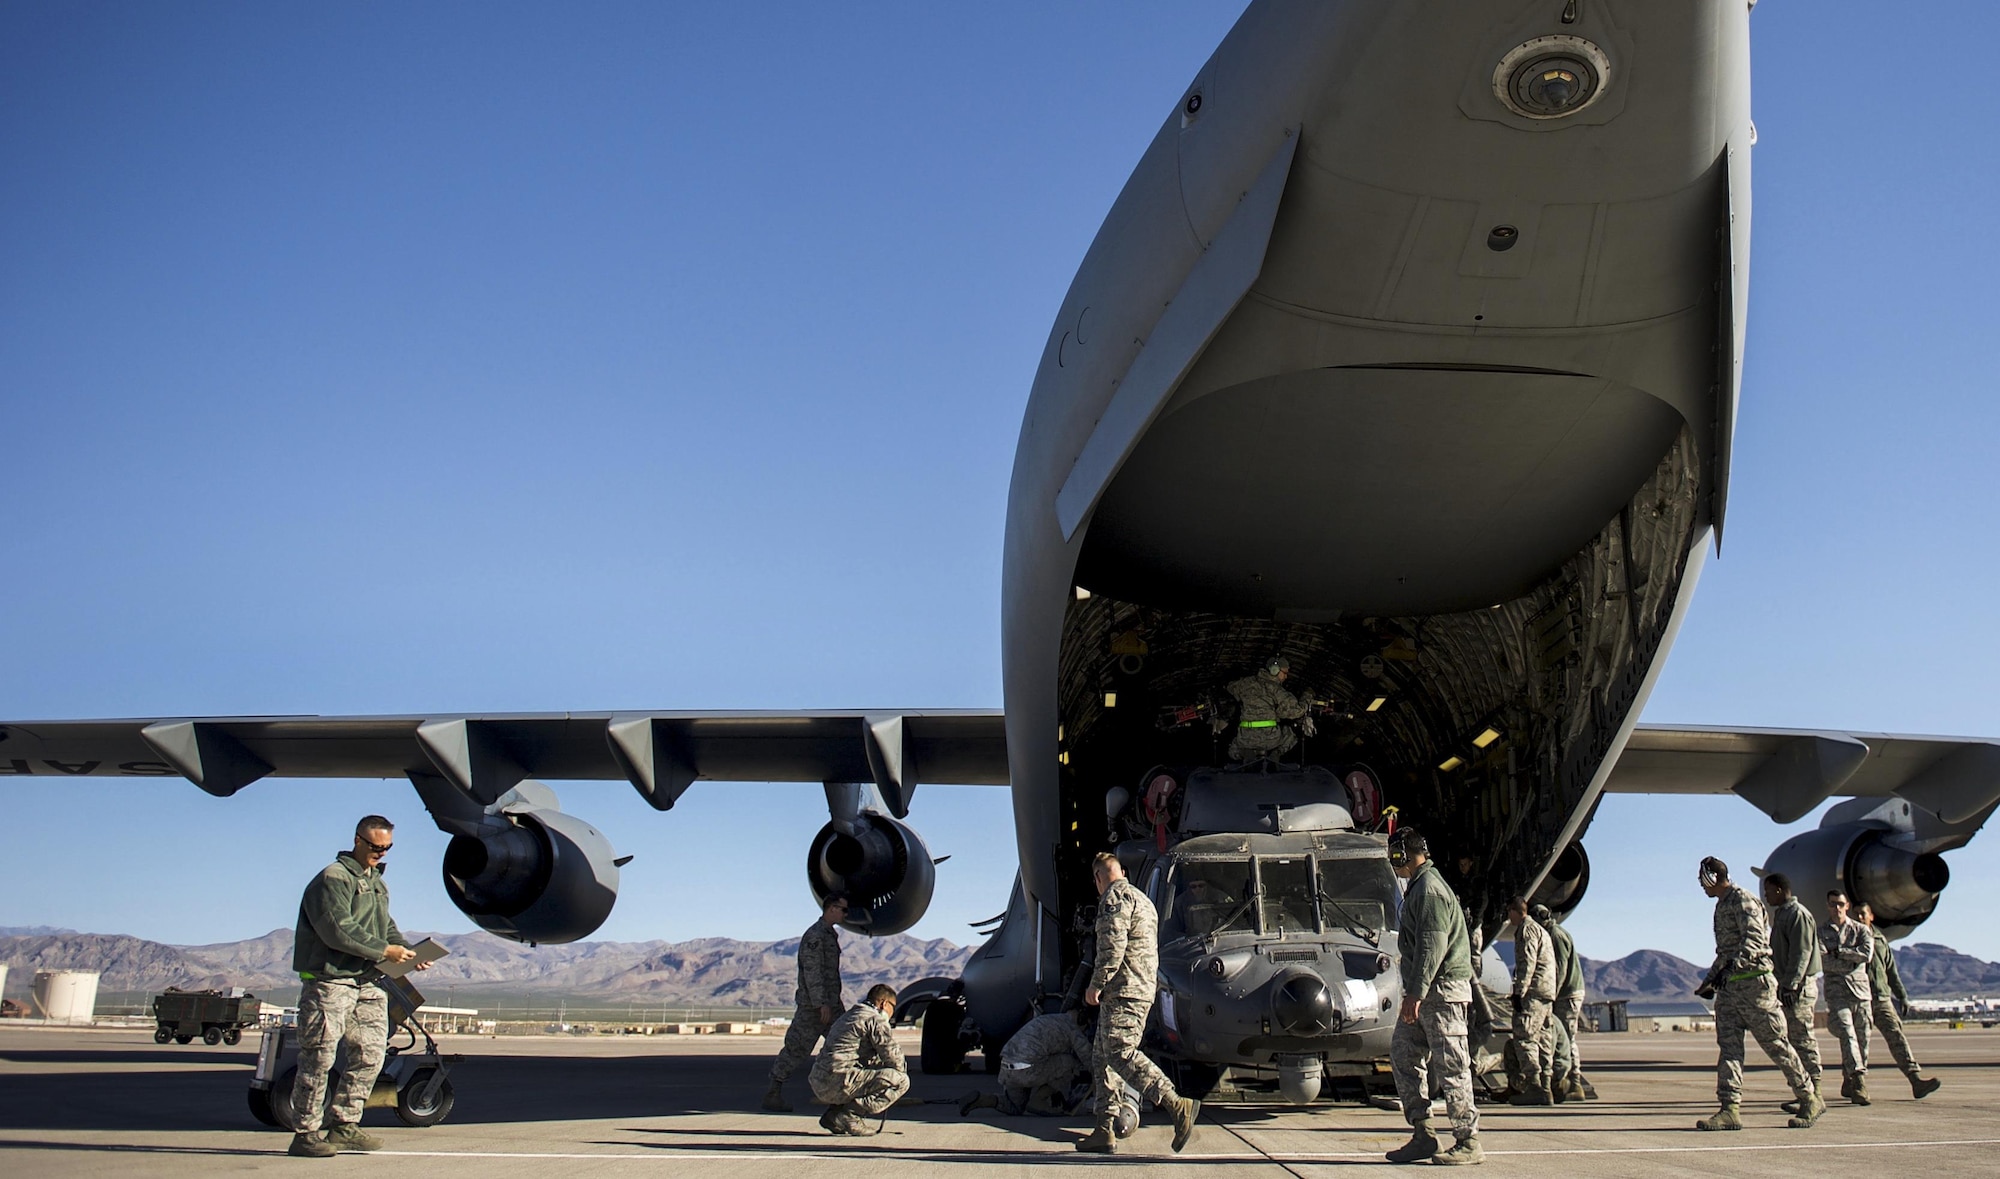 Airmen, 34th Weapons Squadron, finish loading the first of two HH-60 Pave Hawks into a C-17 Globemaster III assigned to the 57th Weapons Squadron, McChord Air Force Base, Wash., March 28, 2017. The Pave Hawk is a highly modified version of the Army Black Hawk helicopter, which features an upgraded communications and navigation suite. (U.S. Air Force photo by Airman 1st Class Kevin Tanenbaum/Released) 